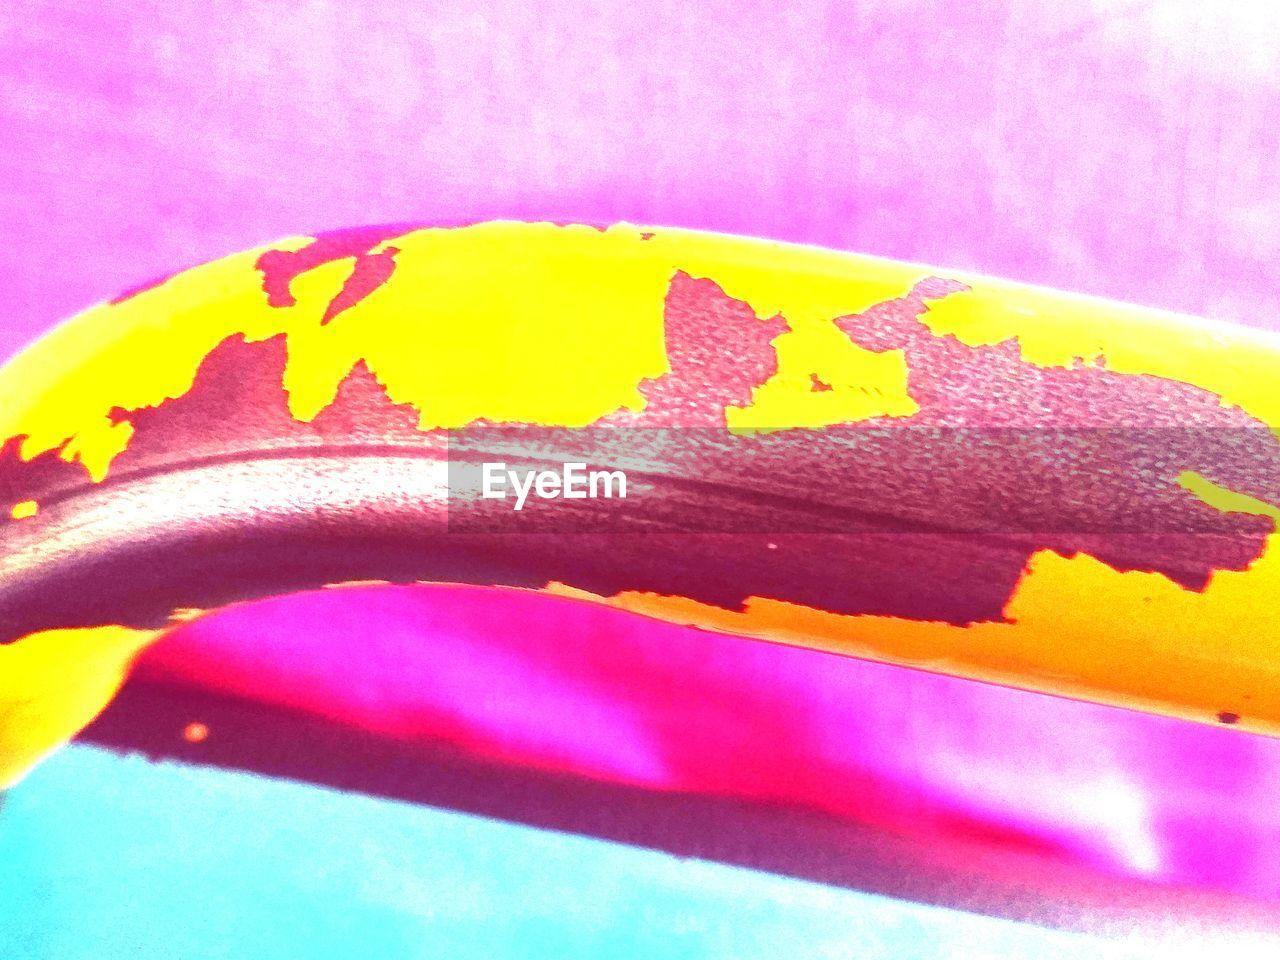 CLOSE-UP VIEW OF MULTI COLORED PINK YELLOW